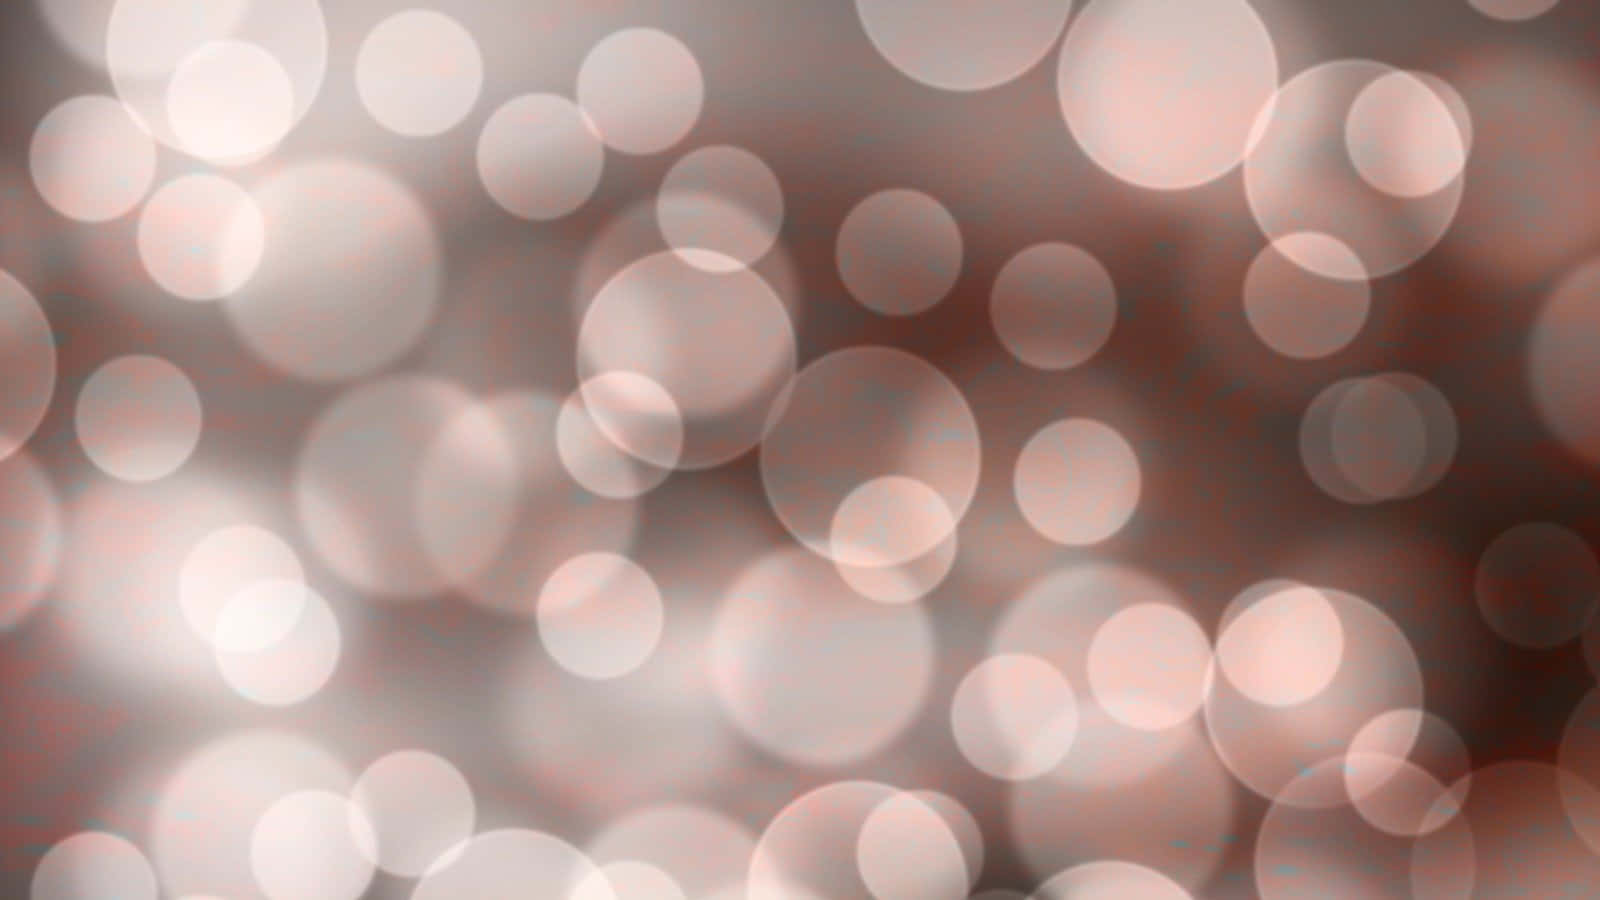 Bokeh Background With Circles In Pink And Brown